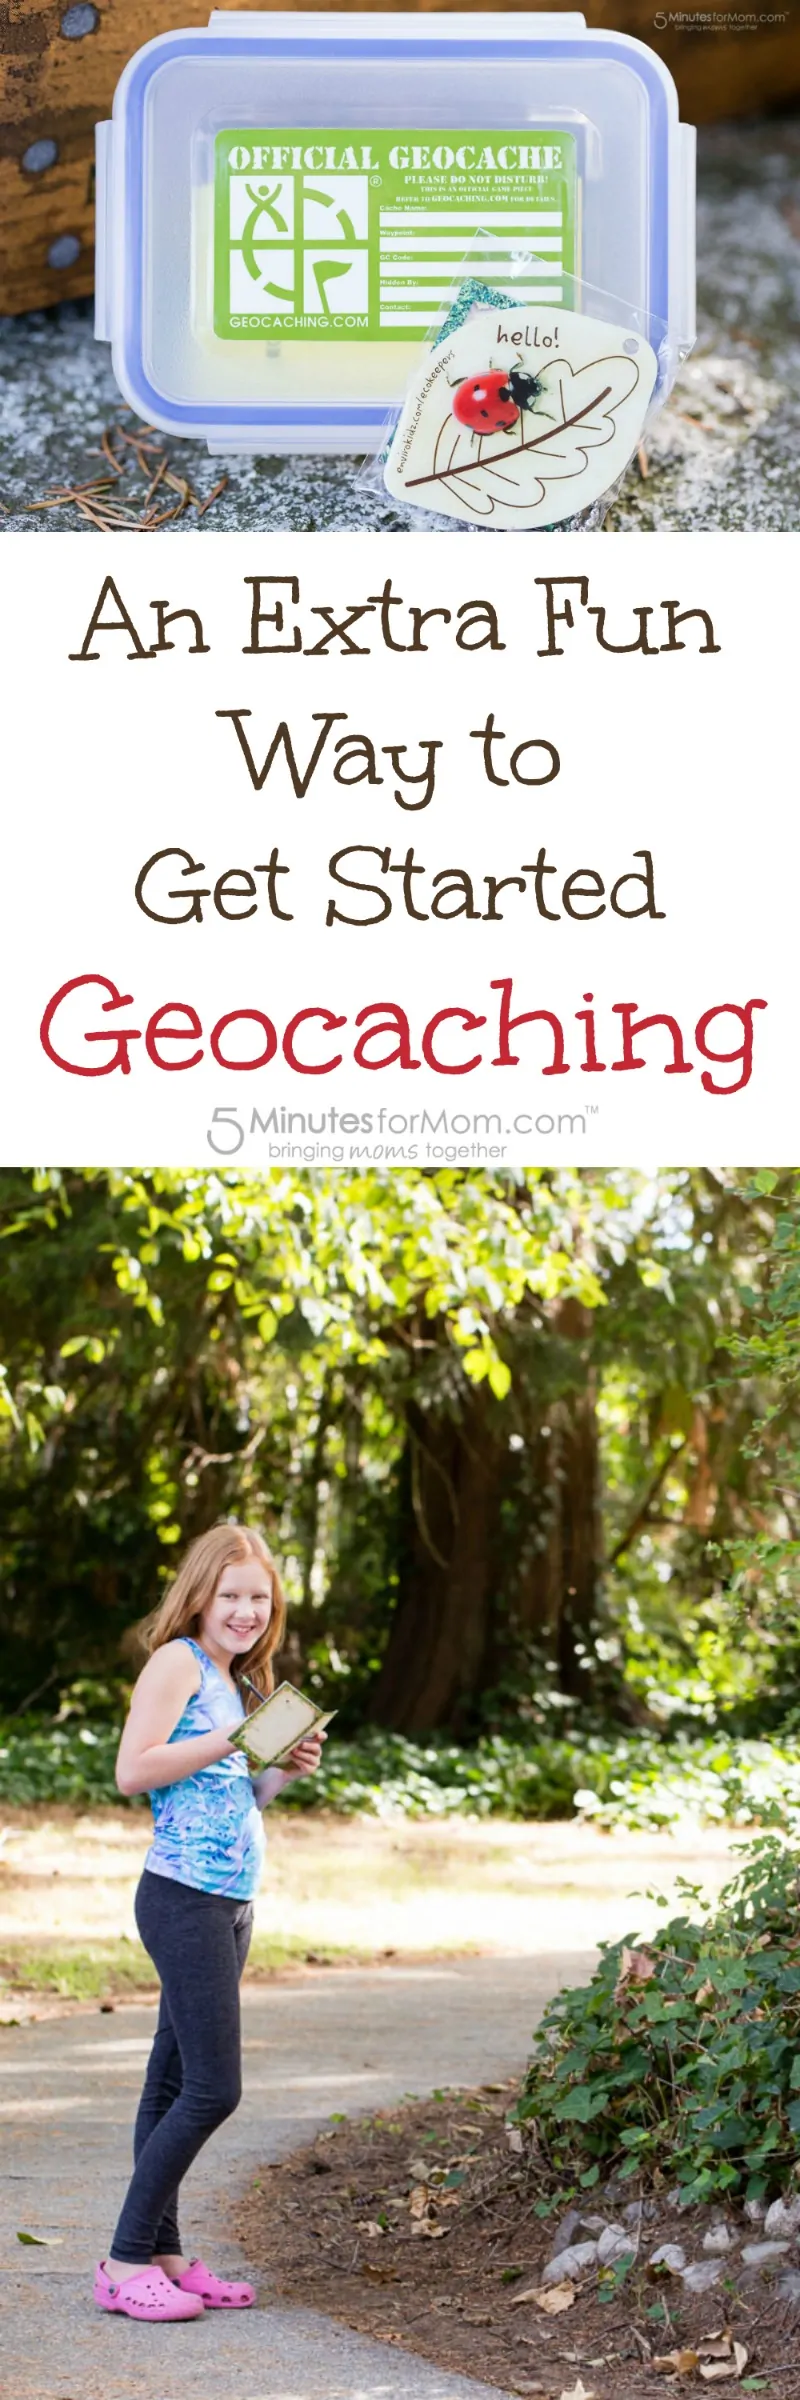 An extra fun way to get started geocaching